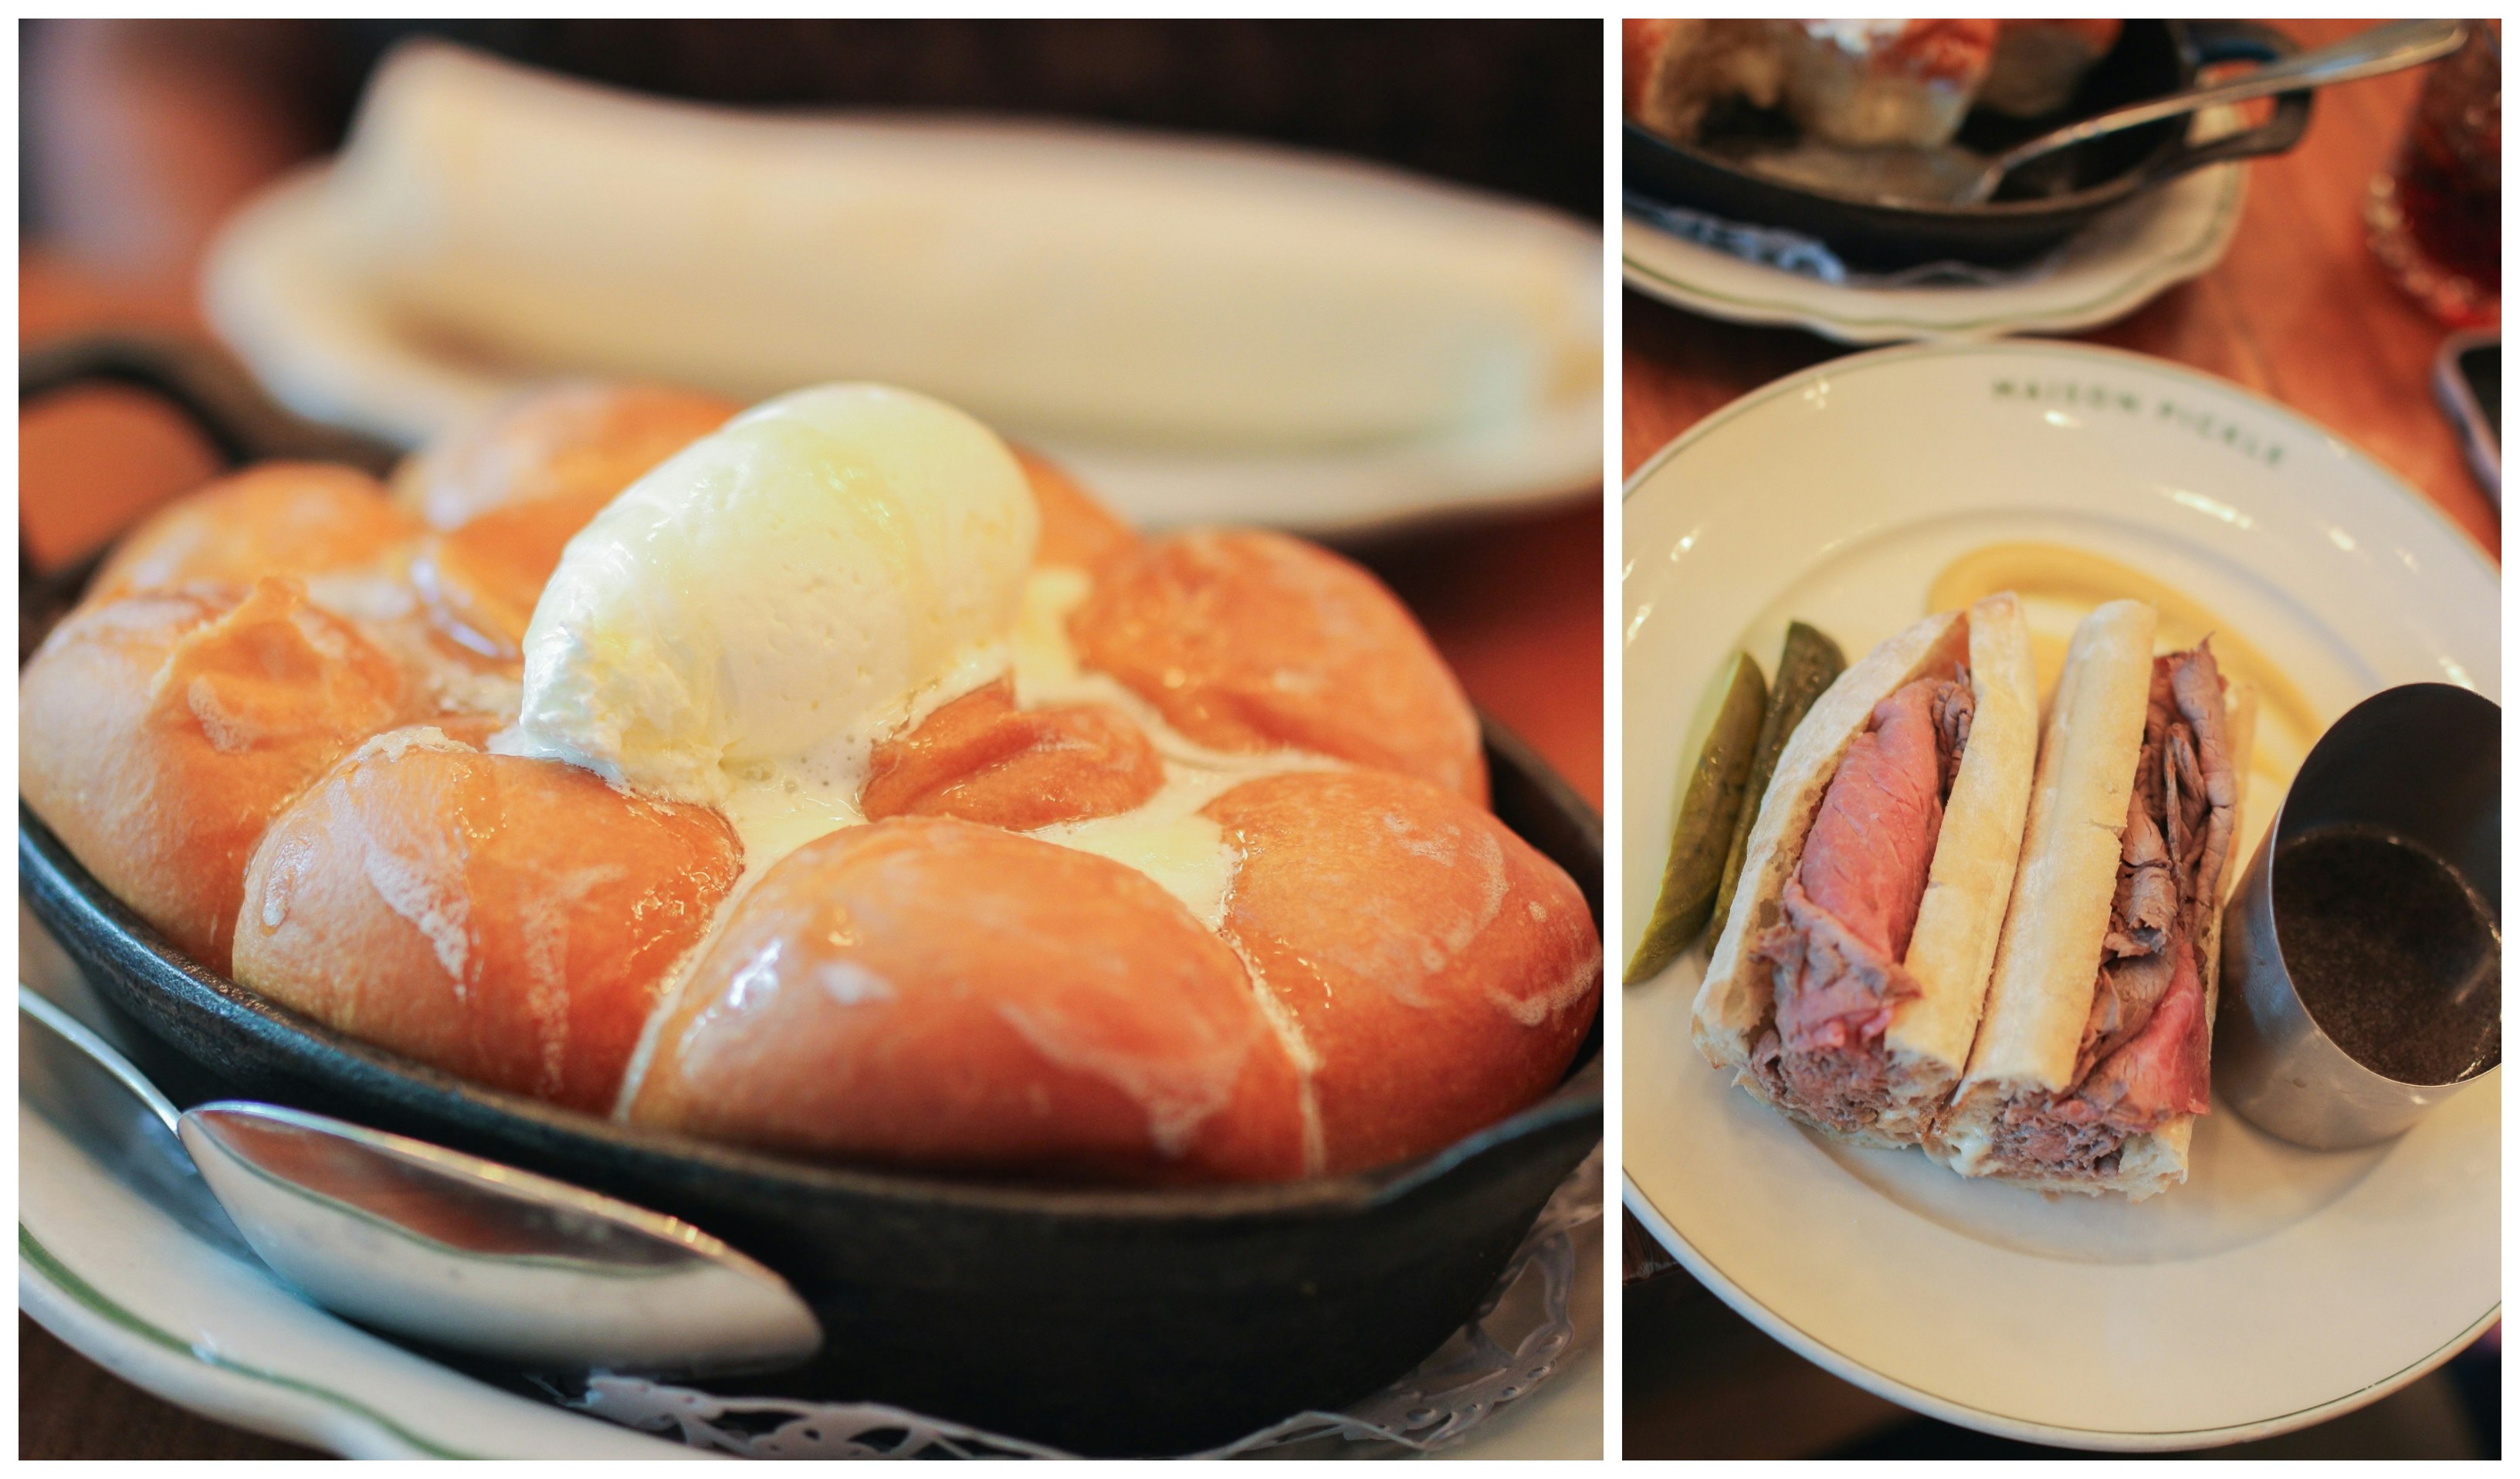 Collage; Left: fresh honey butter rolls at Maison Pickle; Right: a French dip sandwich at Maison Pickle 